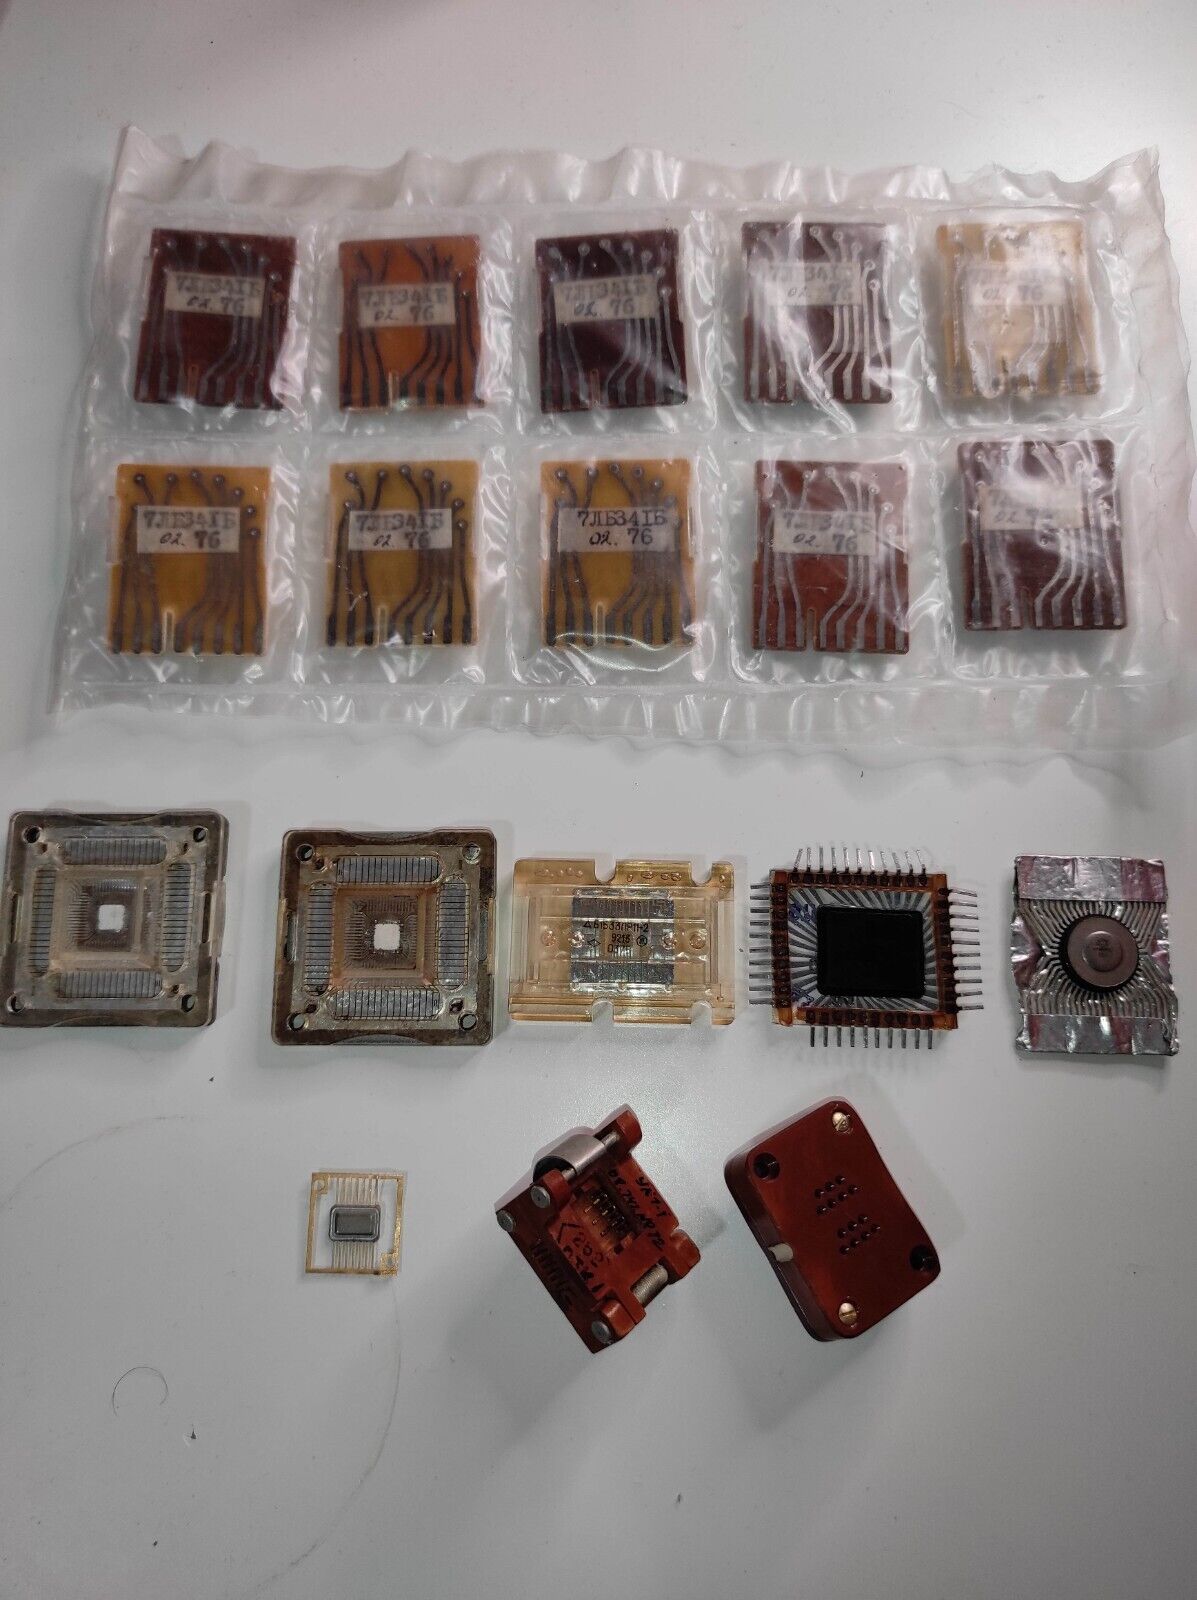 Rare experemental Vintage Soviet Chips, Ic's, Sockets, Microcircuits. USSR 